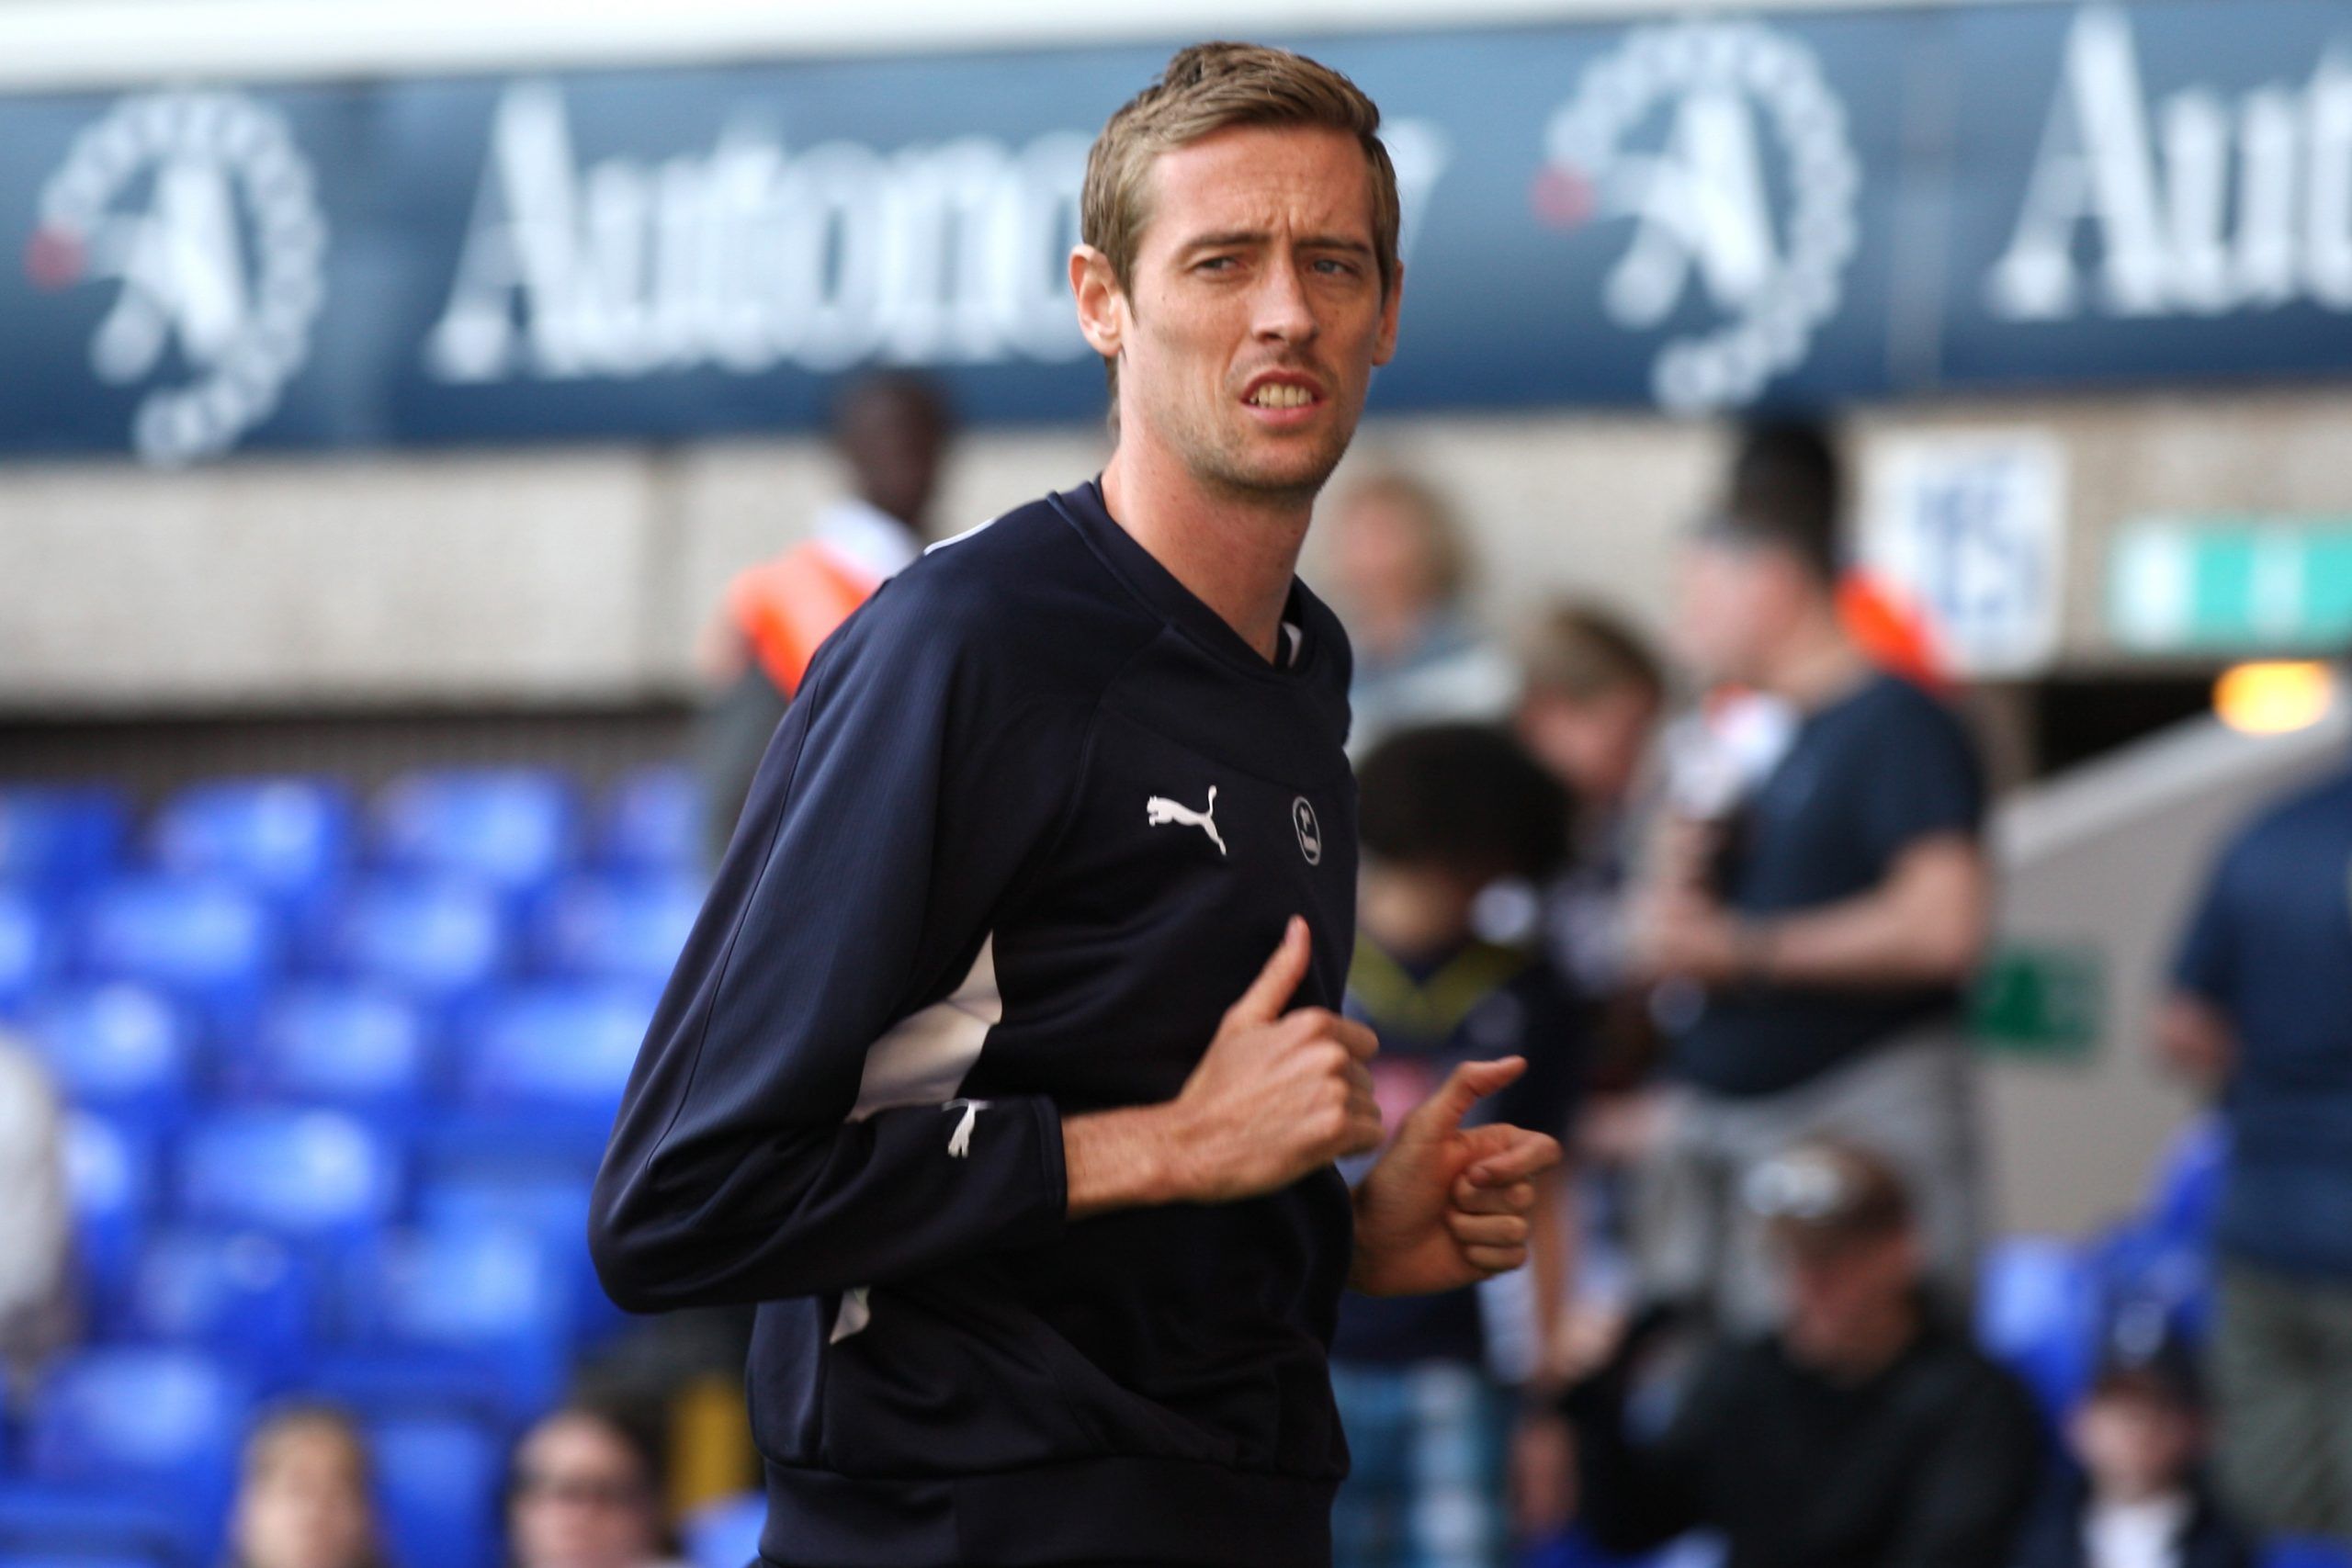 Football - Tottenham Hotspur v Stoke City - Barclays Premier League  - White Hart Lane - 10/11 - 9/4/11 
Tottenham Hotspur's Peter Crouch during warm up 
Mandatory Credit: Action Images / Paul Childs 
NO ONLINE/INTERNET USE WITHOUT A LICENCE FROM THE FOOTBALL DATA CO LTD. FOR LICENCE ENQUIRIES PLEASE TELEPHONE +44 (0) 207 864 9000.